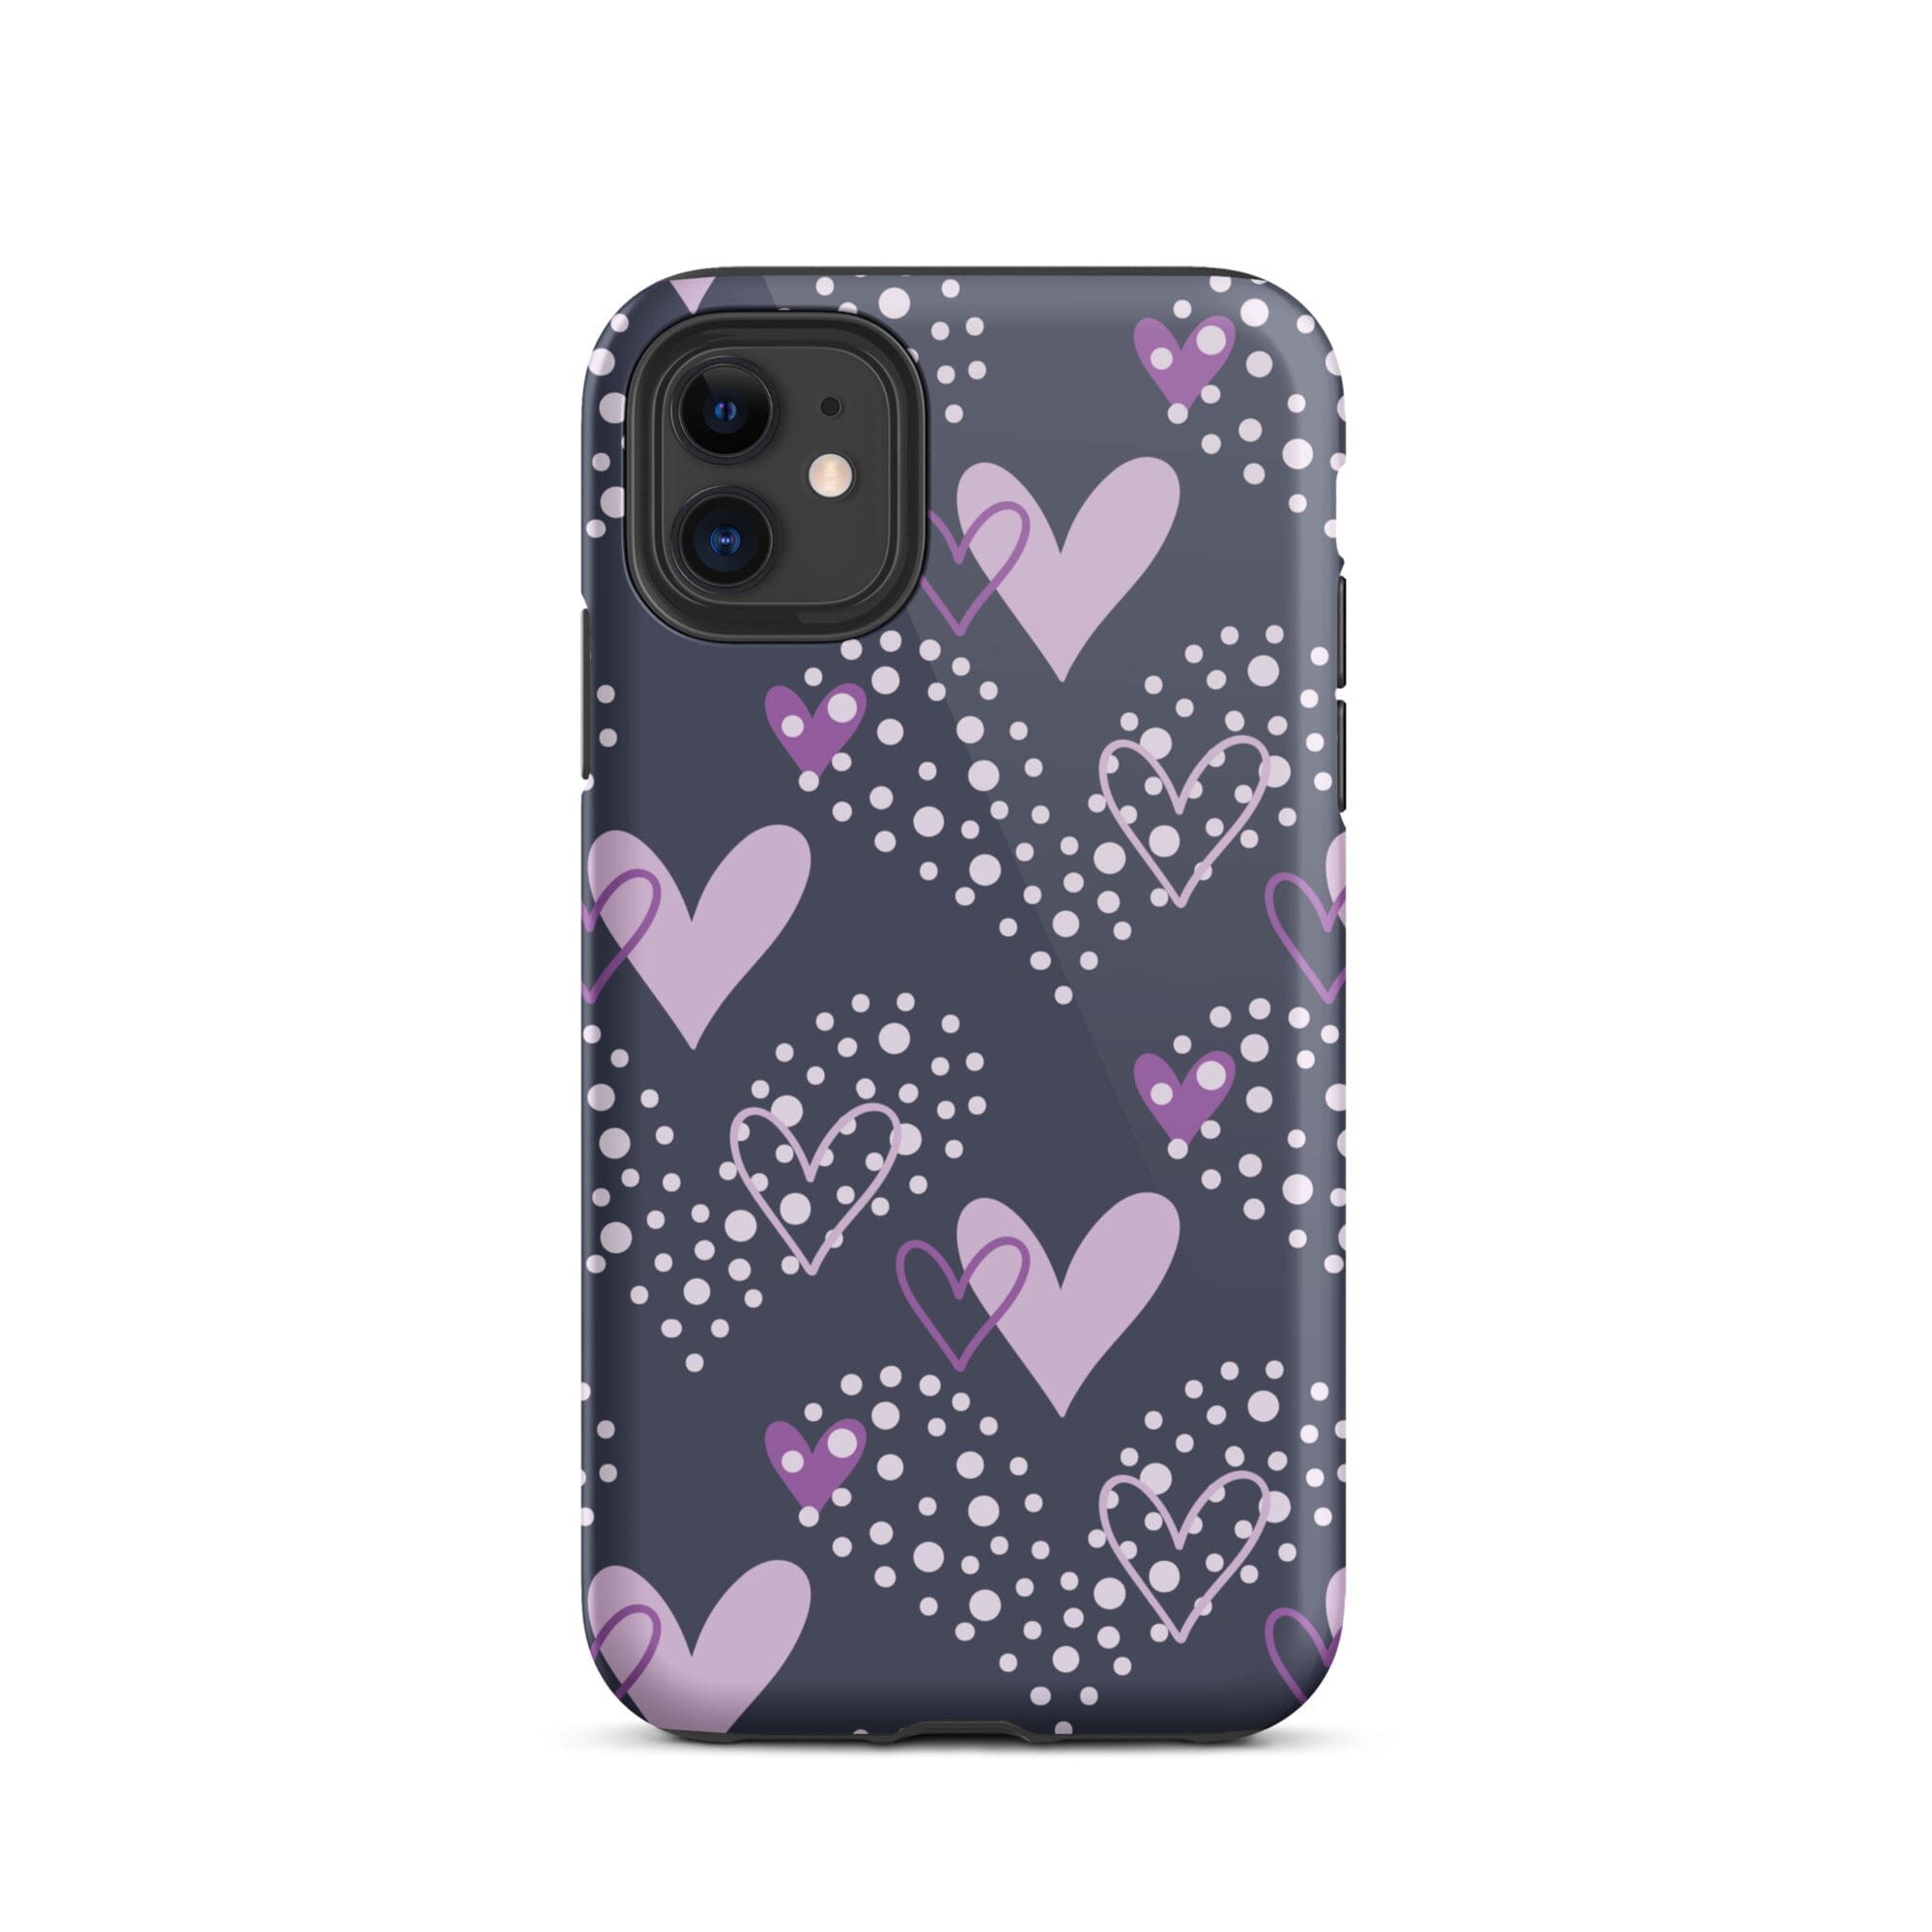 Purple Hearts iPhone Case - KBB Exclusive Knitted Belle Boutique iPhone 11 